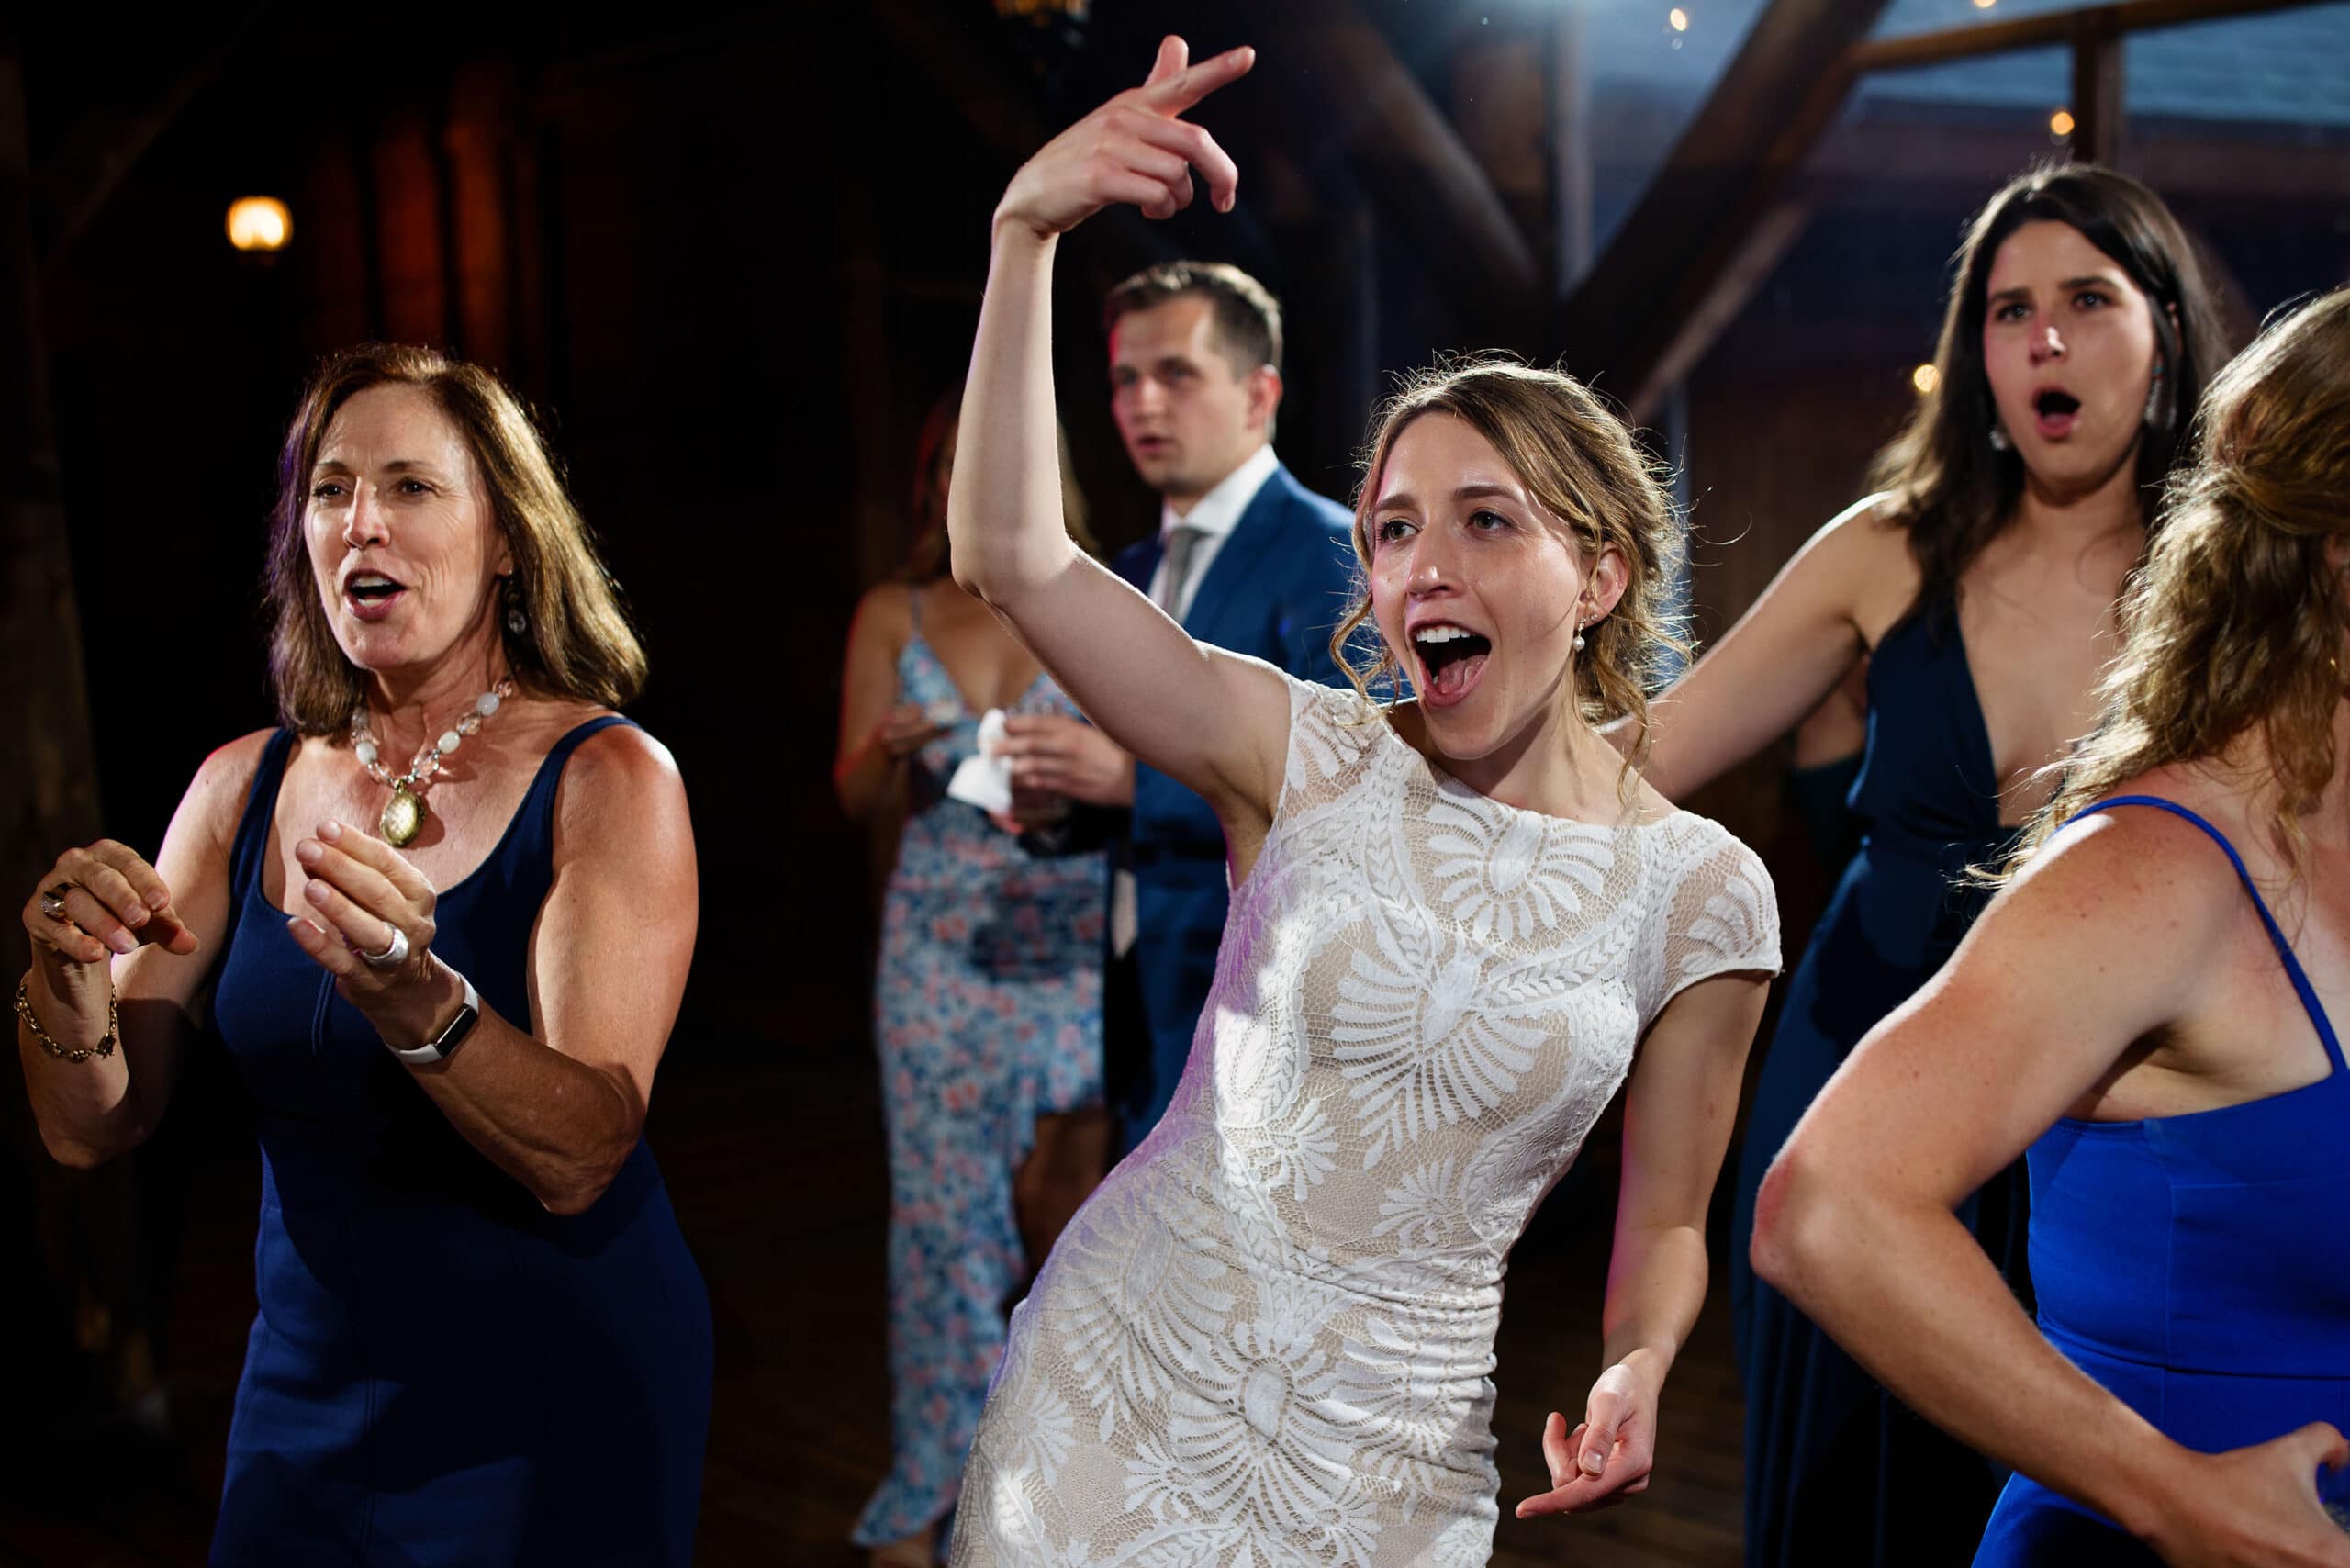 Guests dance during a wedding reception at Piney River Ranch